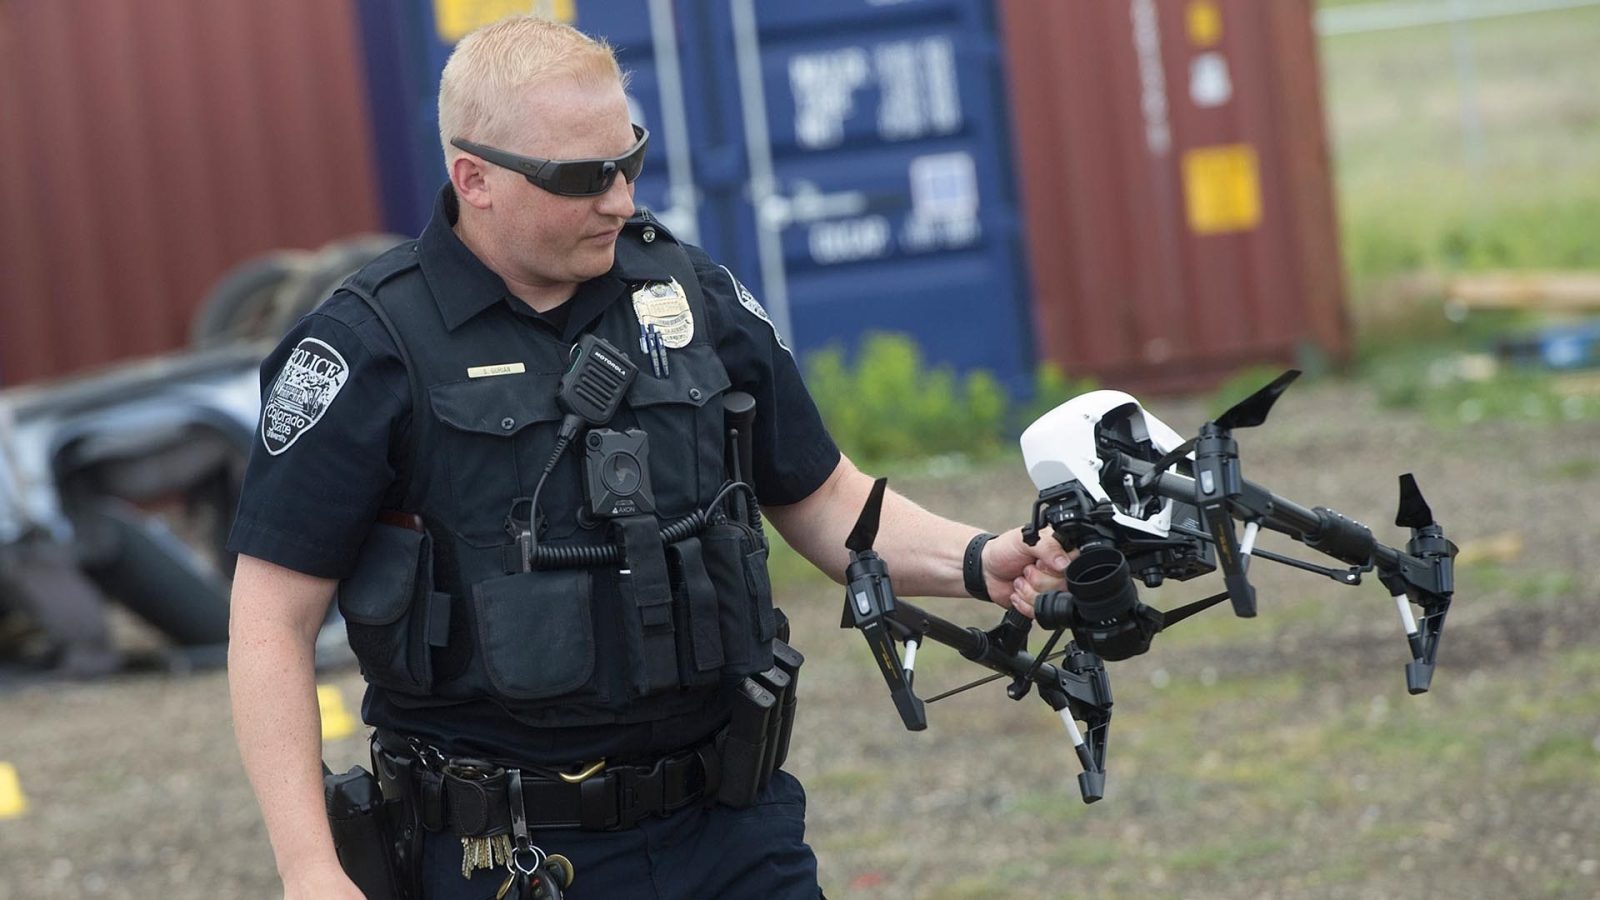 Police-use-of-drones-is-expanding-in-Washington-State.jpg